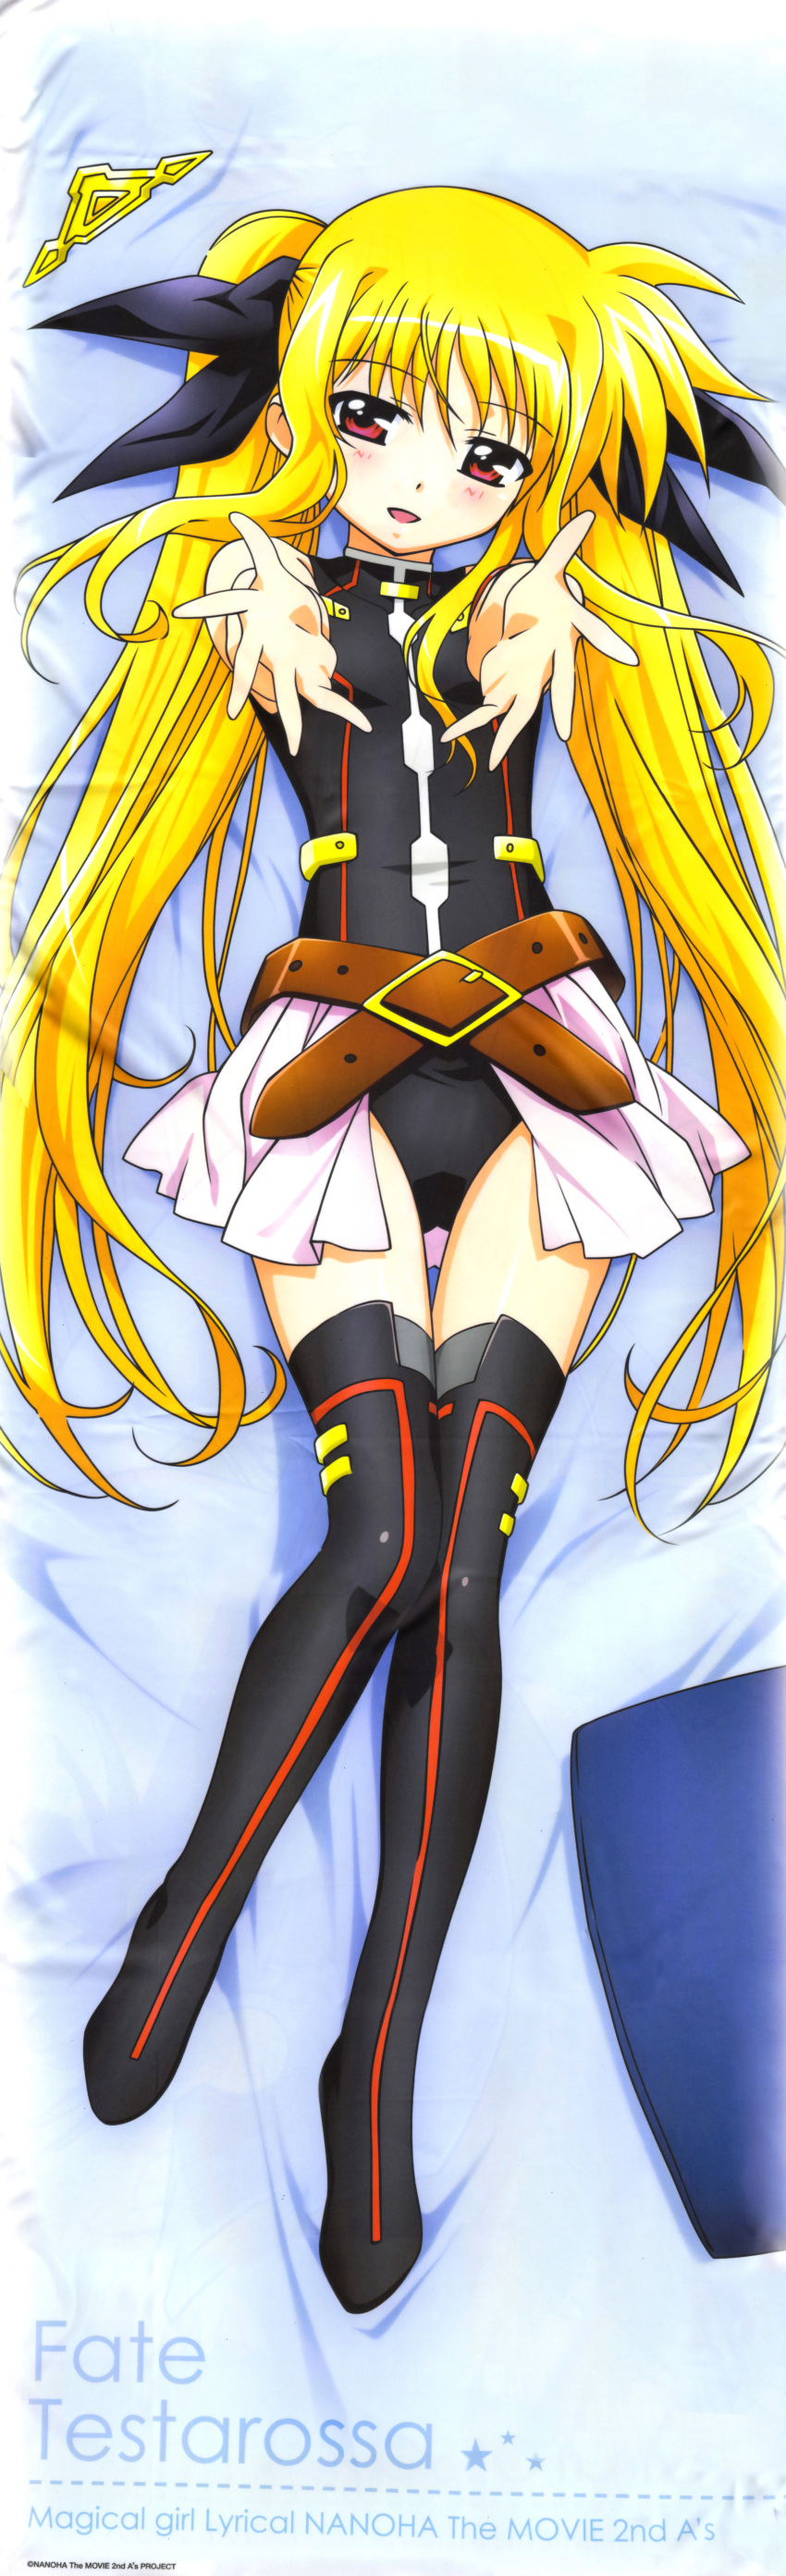 1girl absurdres bardiche belt blonde_hair blush bodysuit bow buckle character_name crease dakimakura fate_testarossa hair_bow highres incredibly_absurdres long_hair lyrical_nanoha magical_girl mahou_shoujo_lyrical_nanoha mahou_shoujo_lyrical_nanoha_a's mahou_shoujo_lyrical_nanoha_a's mahou_shoujo_lyrical_nanoha_the_movie_2nd_a's mahou_shoujo_lyrical_nanoha_the_movie_2nd_a's official_art okuda_yasuhiro outstretched_arms red_eyes scan skirt solo star thigh-highs thighhighs title_drop twintails